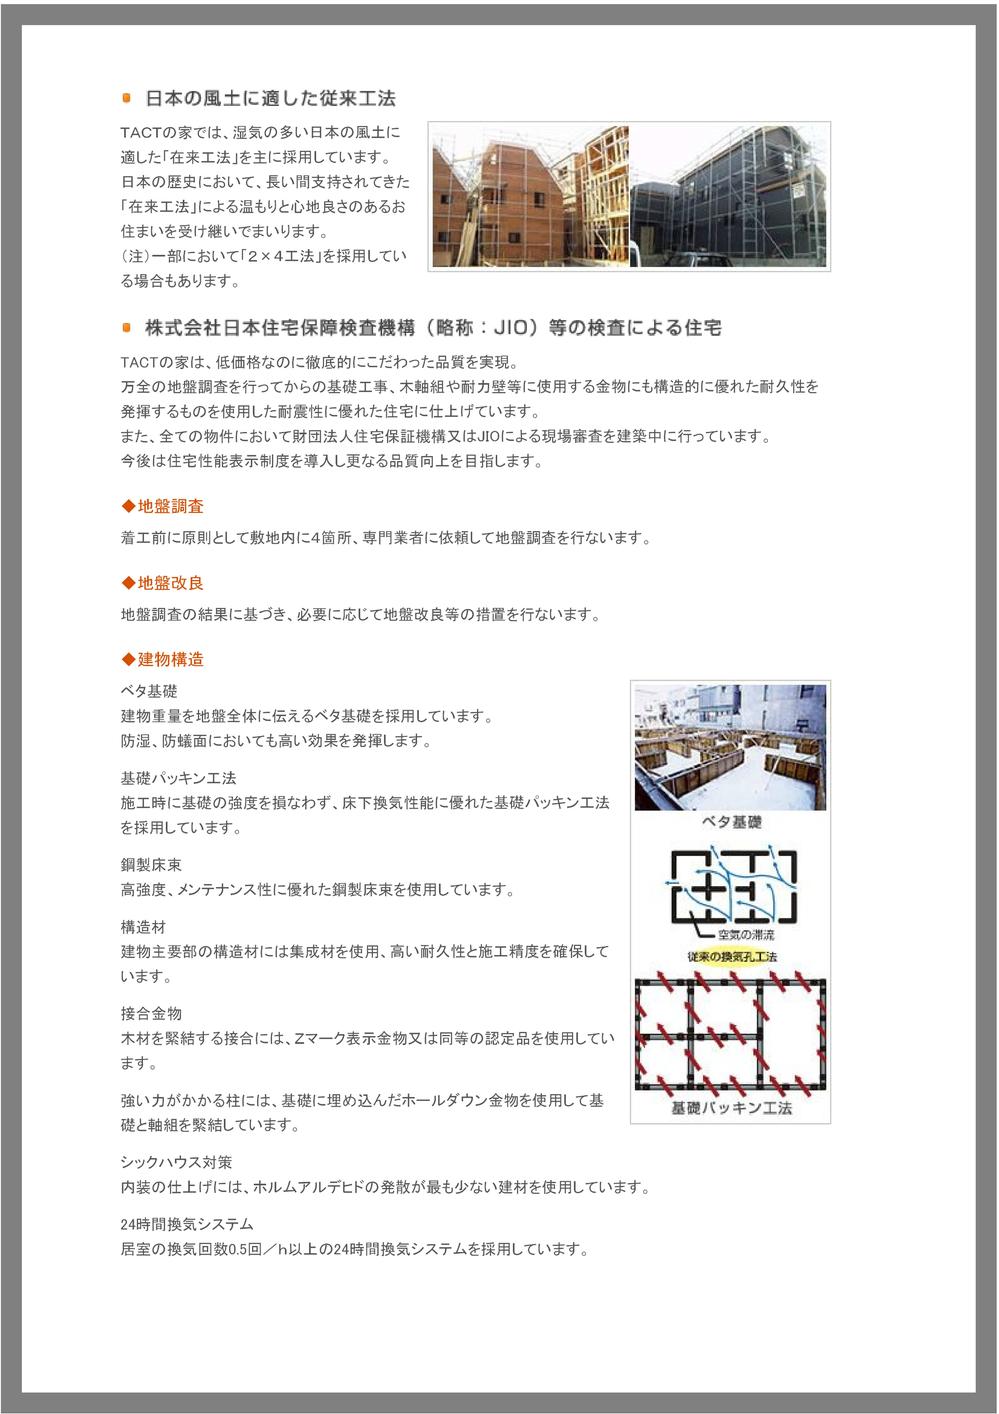 Construction ・ Construction method ・ specification. Basic packing